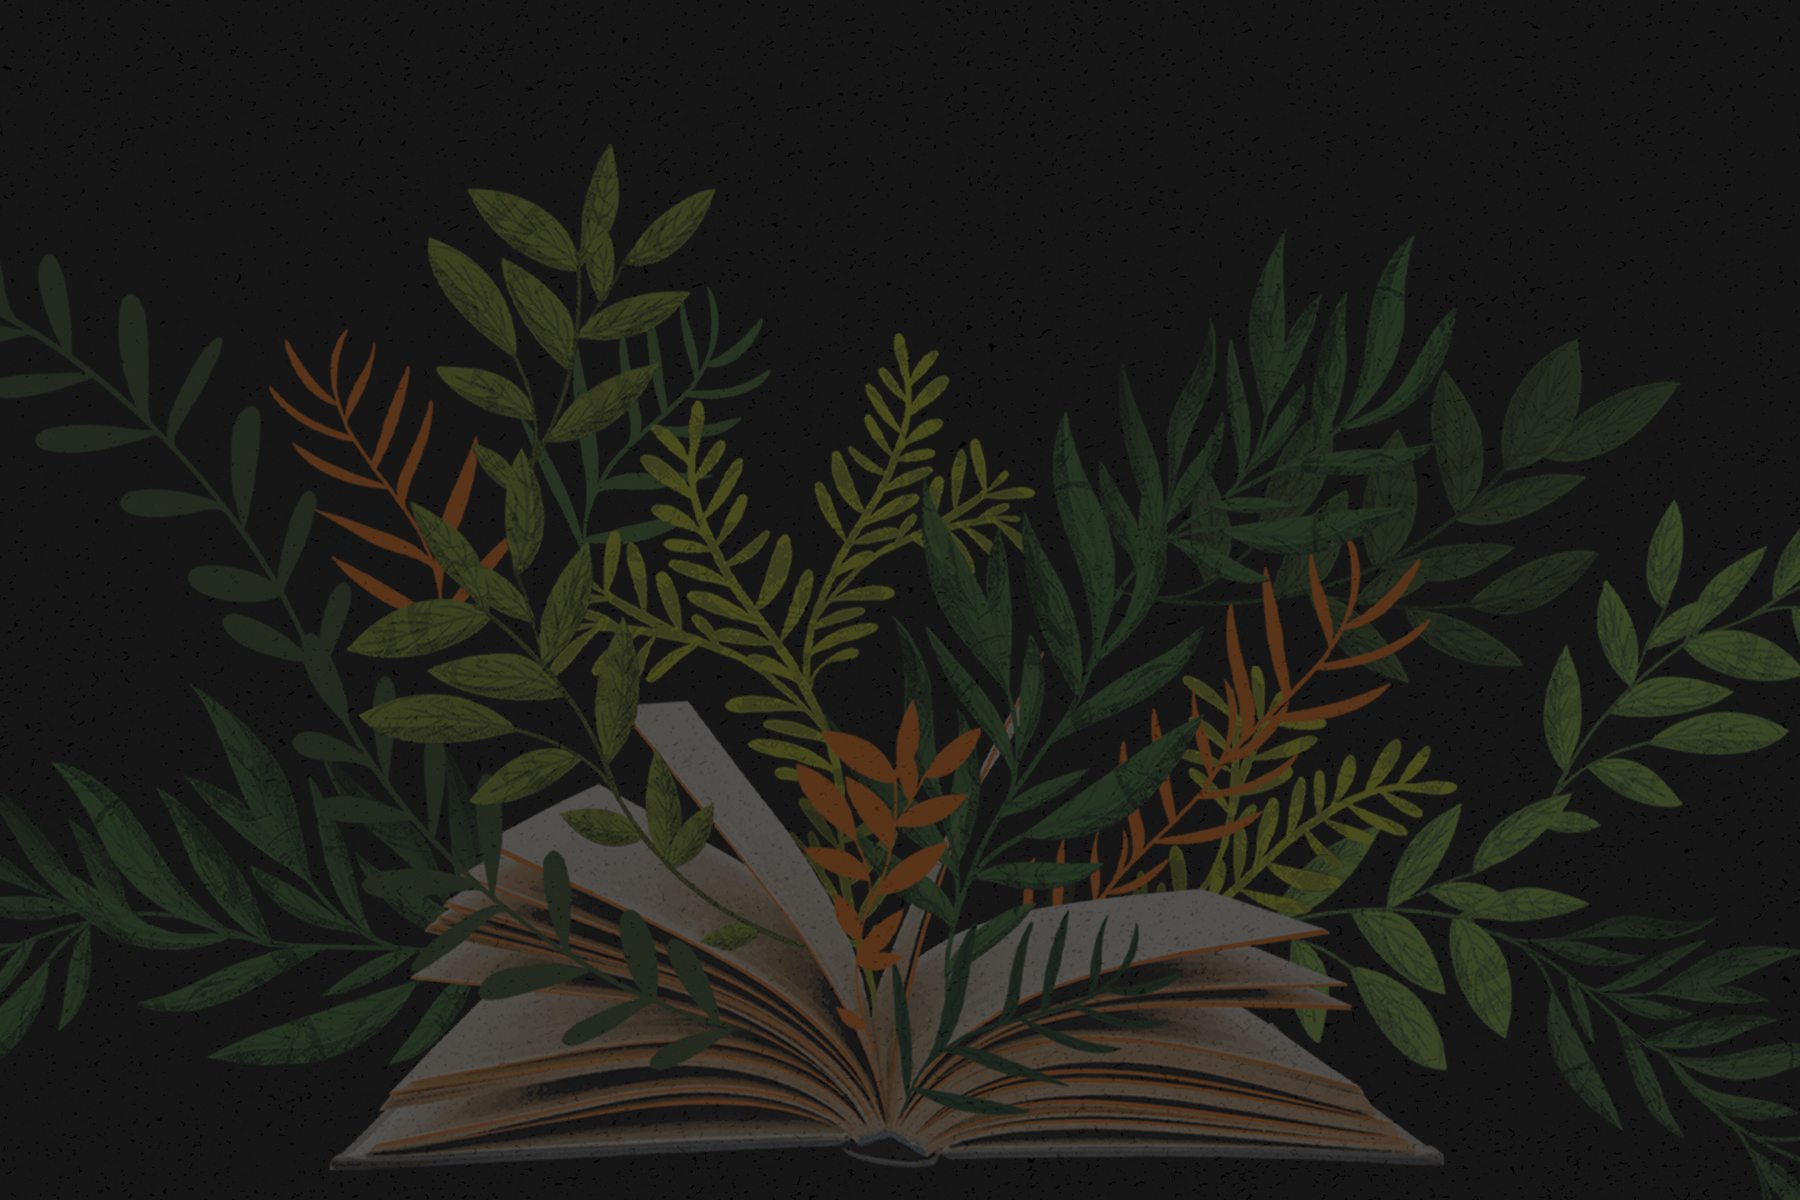 A black background with illustrated plant life emerging from a book